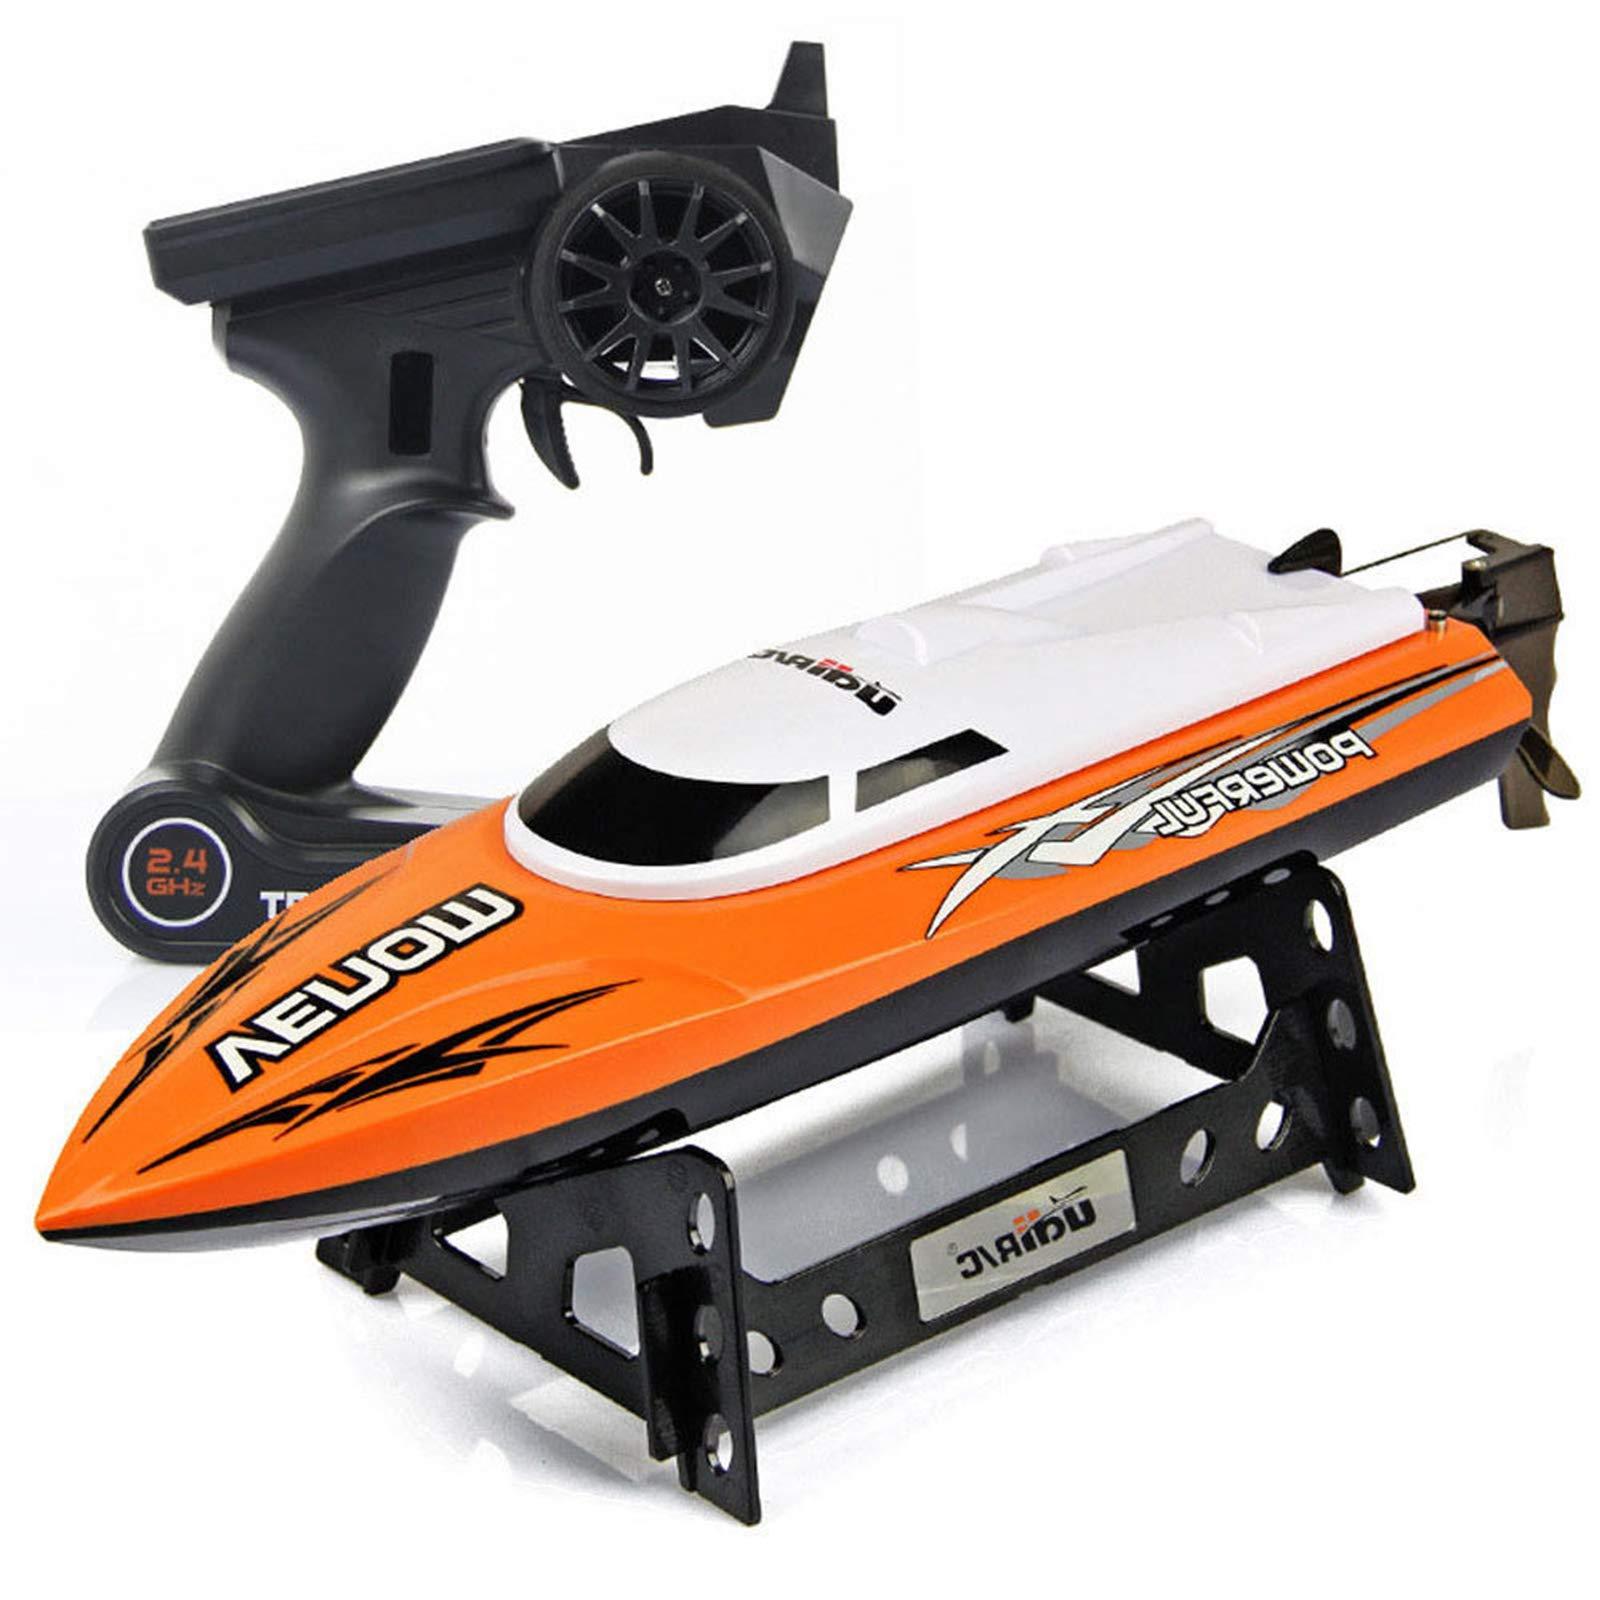 Fastest Rc Jet Boat: Top RC Jet Boat Models for Speed Enthusiasts